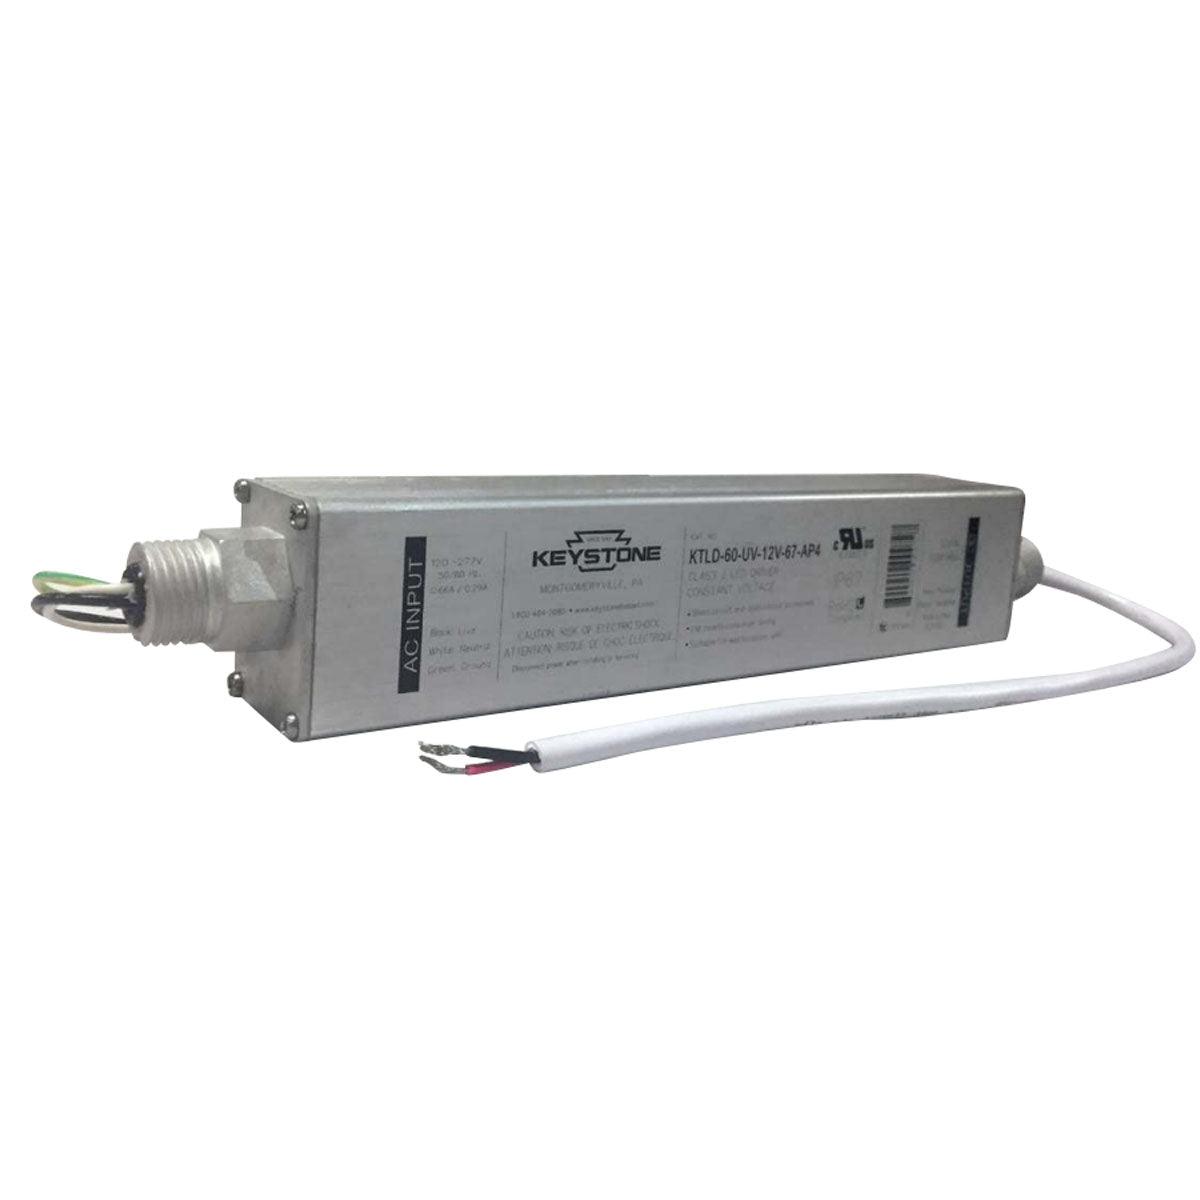 60 Watts, 12VDC Class 2 Constant Voltage LED Diver, 120-277V Input, IP67 Rated - Bees Lighting